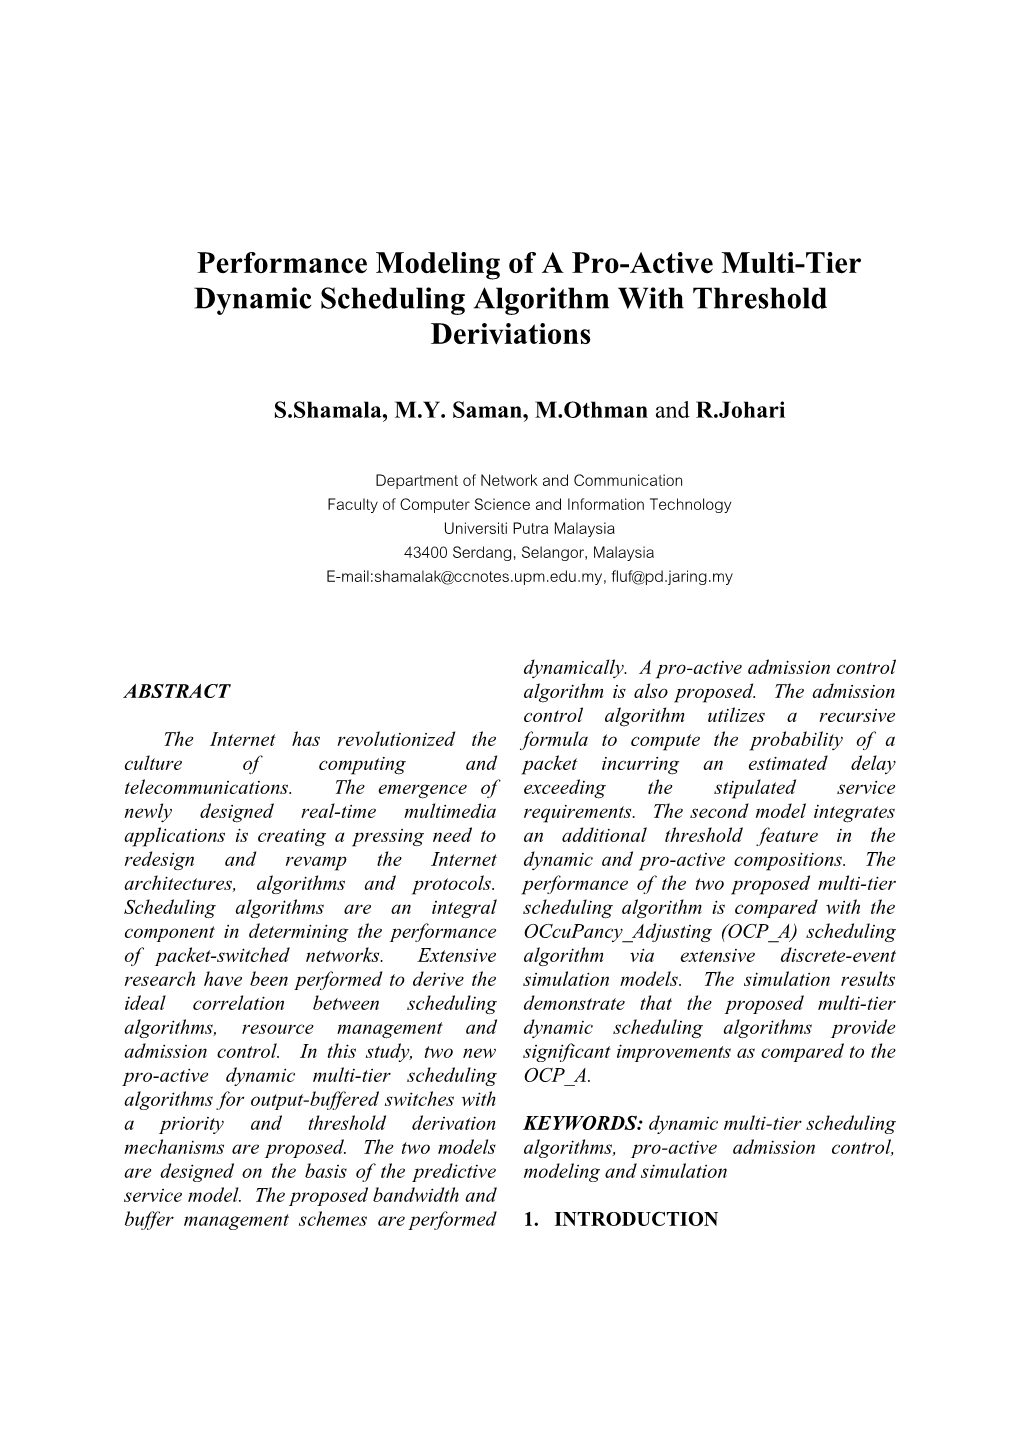 Performance Modeling of a Pro-Active Multi-Tier Dynamic Scheduling Algorithm with Threshold